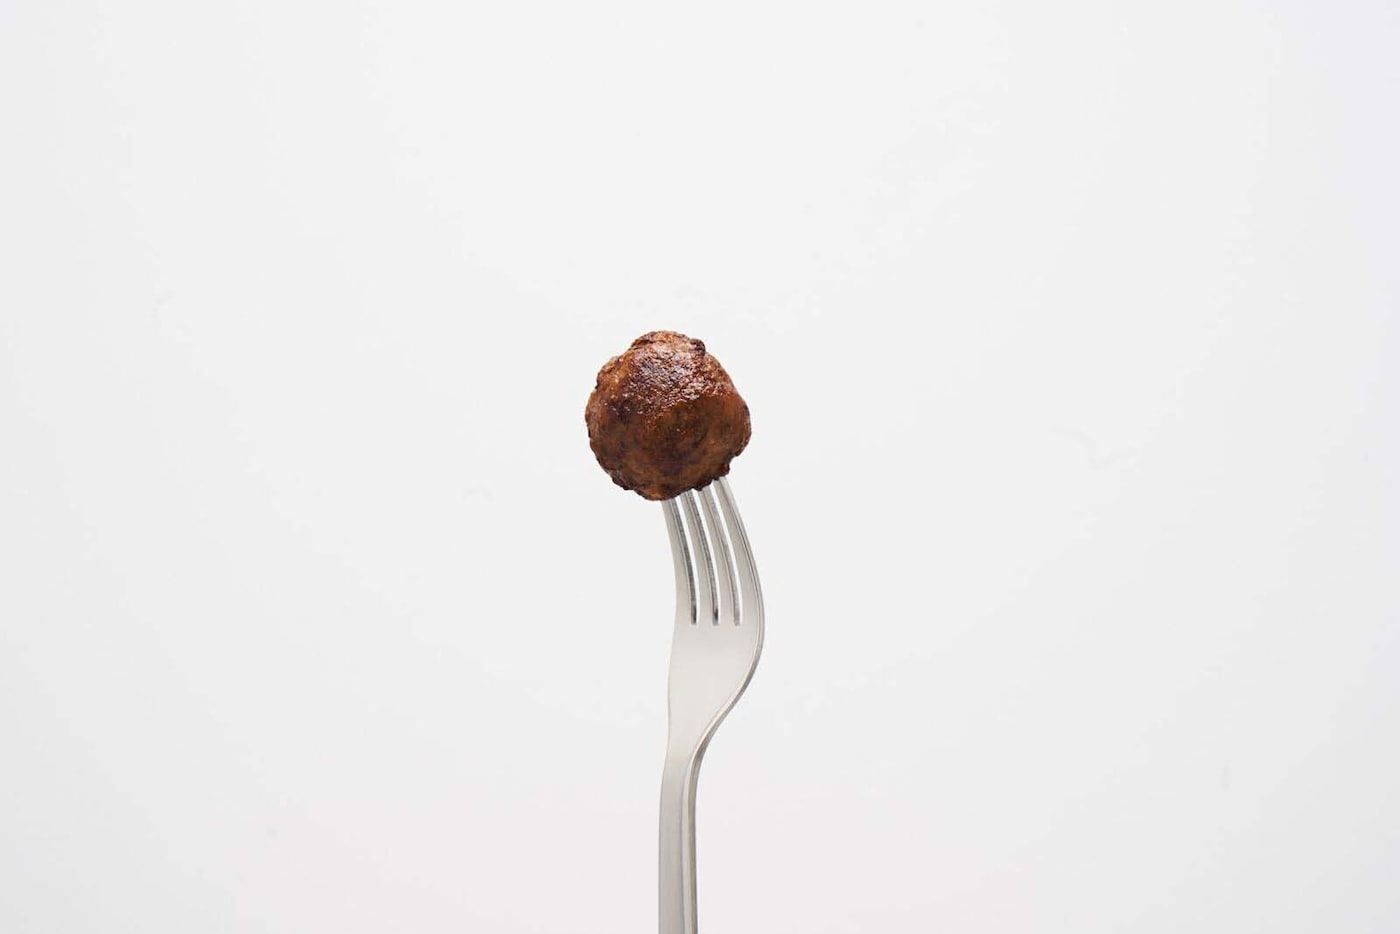 A meatball on a fork against a white background.